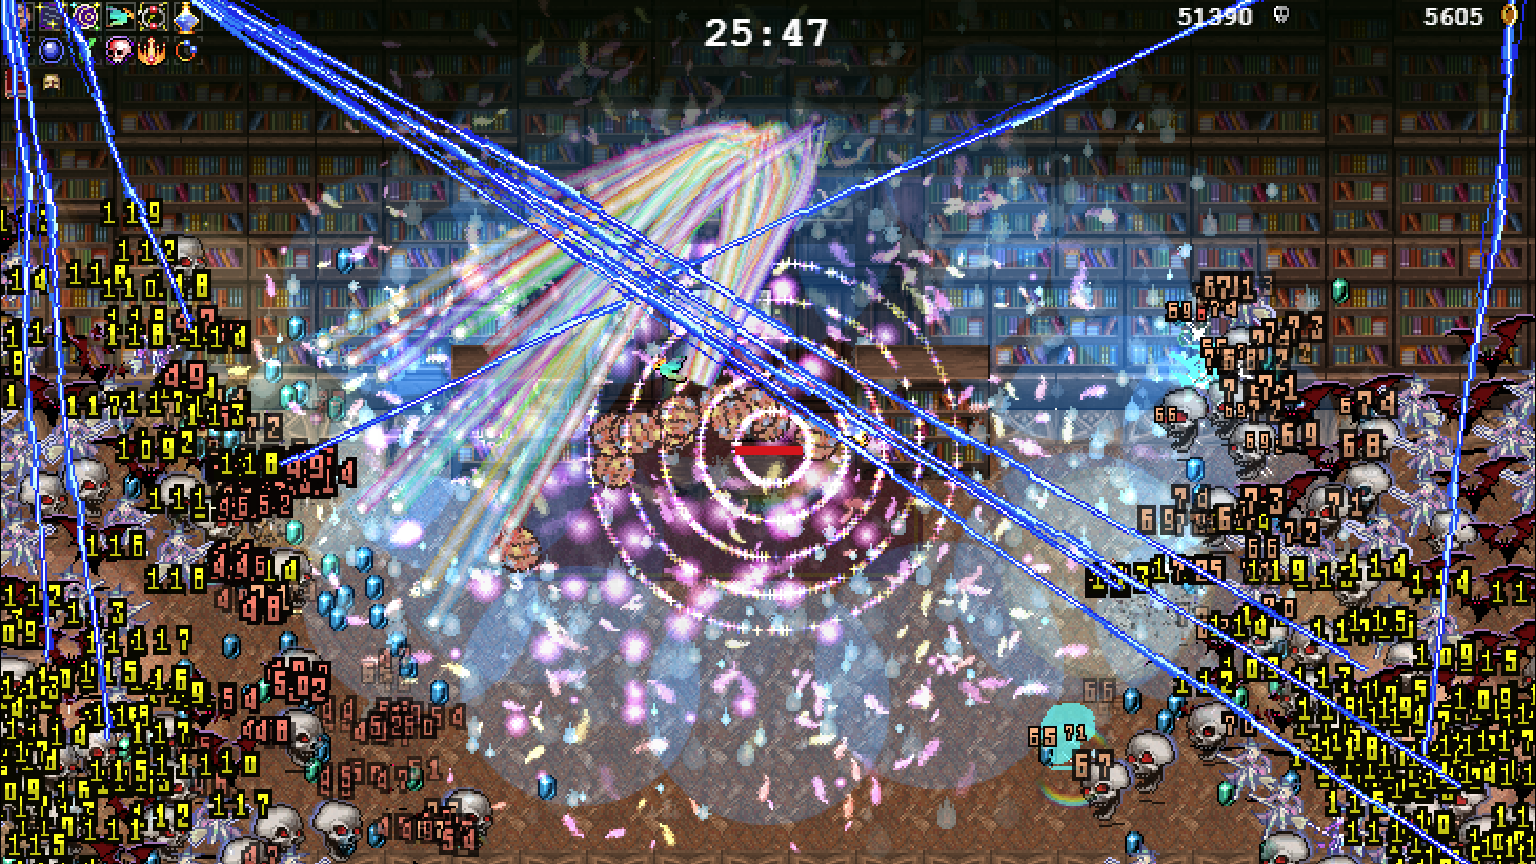 A colorful explosion of violence in a screenshot from Vampire Survivors.